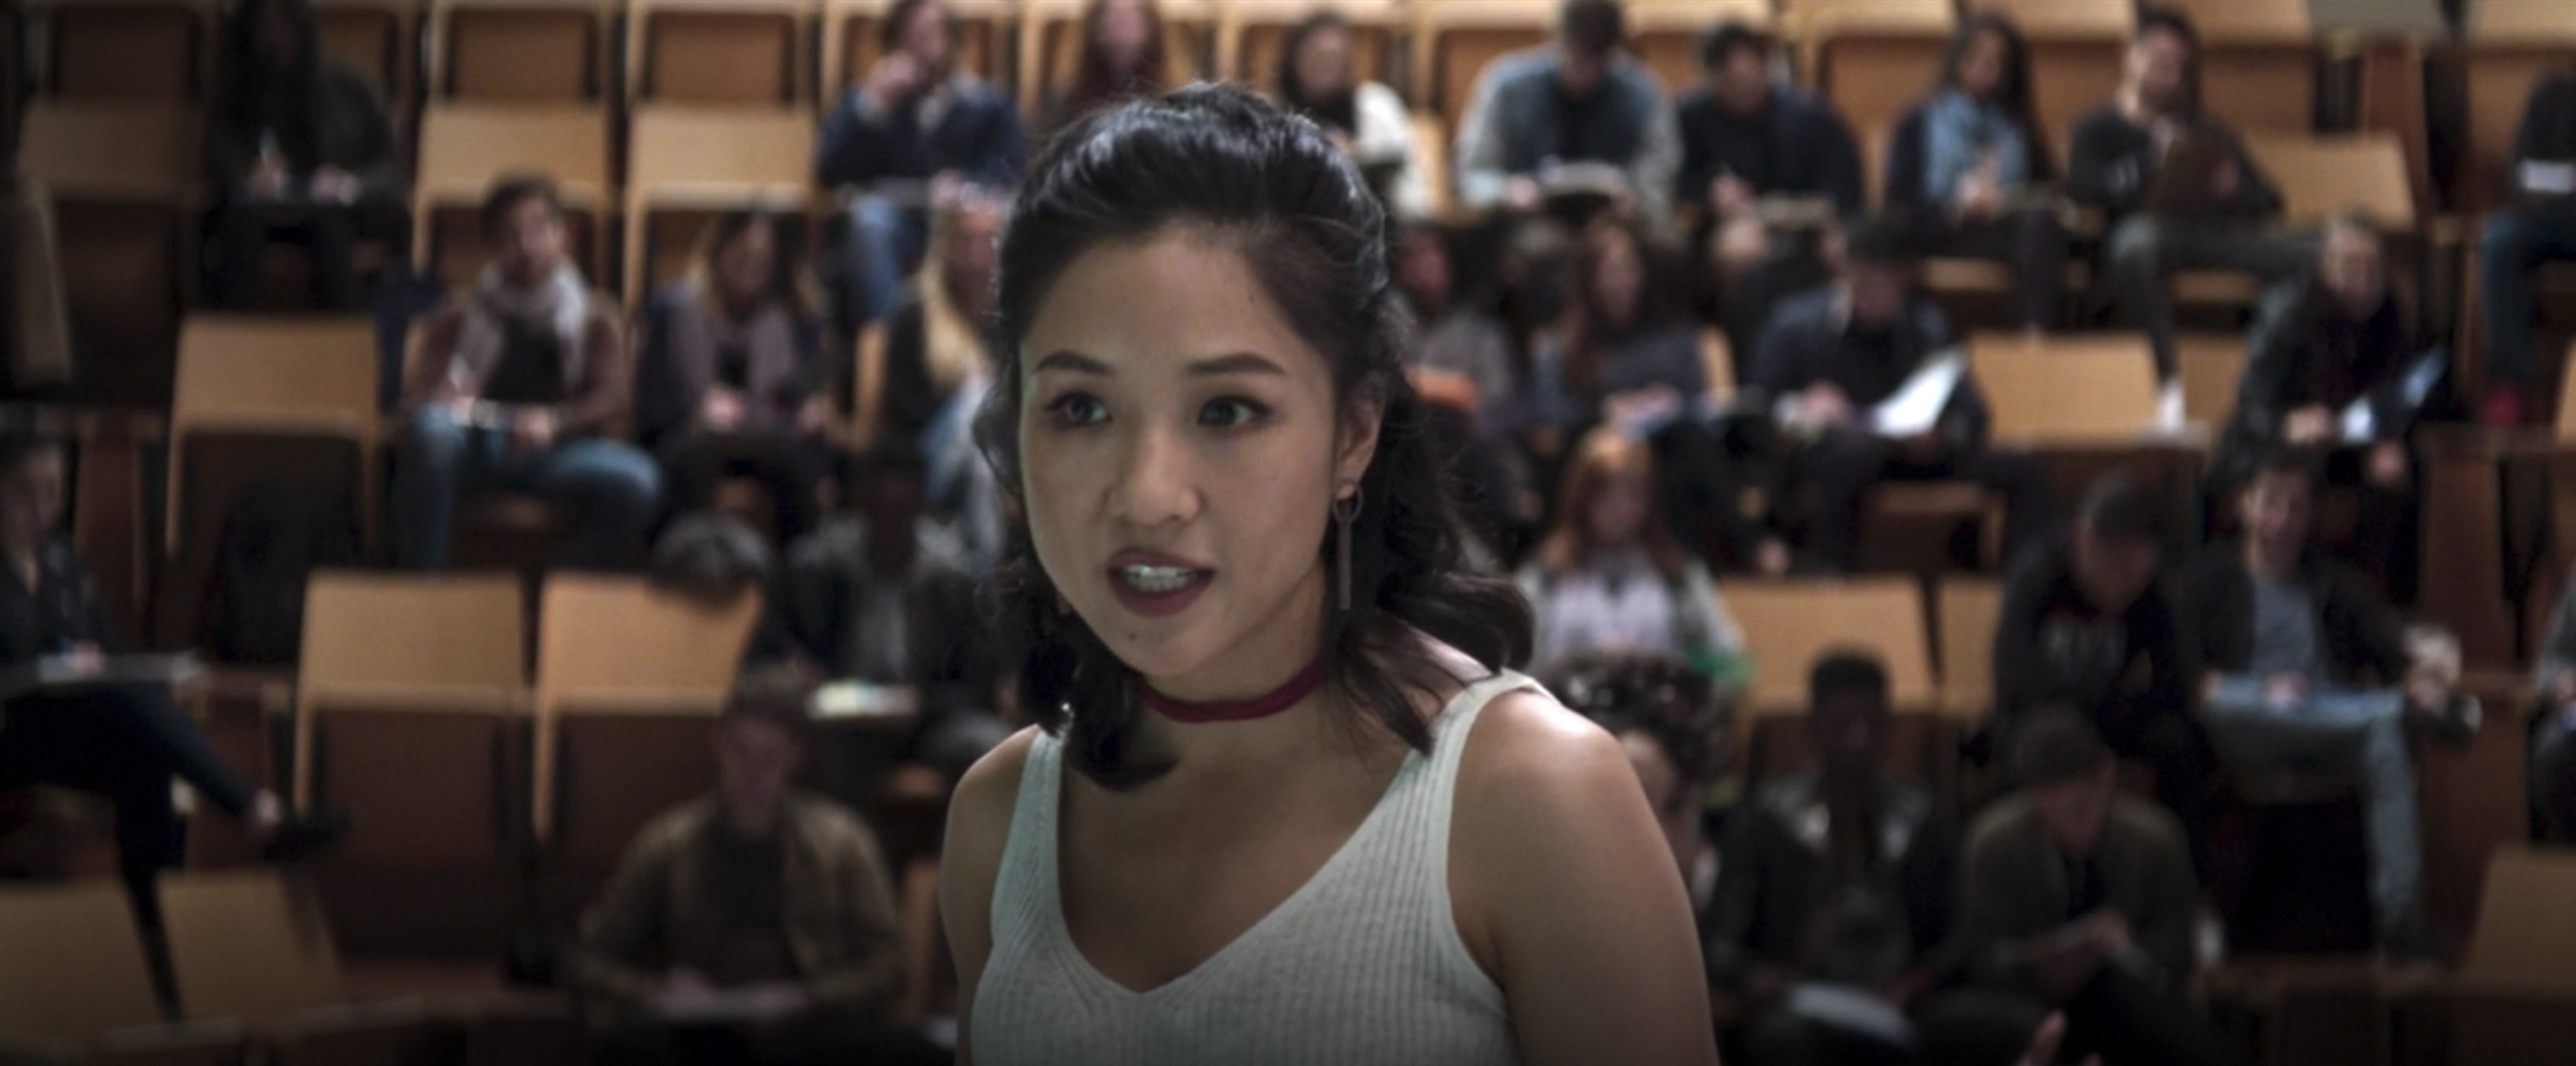 Coonstance Wu as Professor Rachel Chu delivers a lecture to her college class in &quot;Crazy Rich Asians&quot;